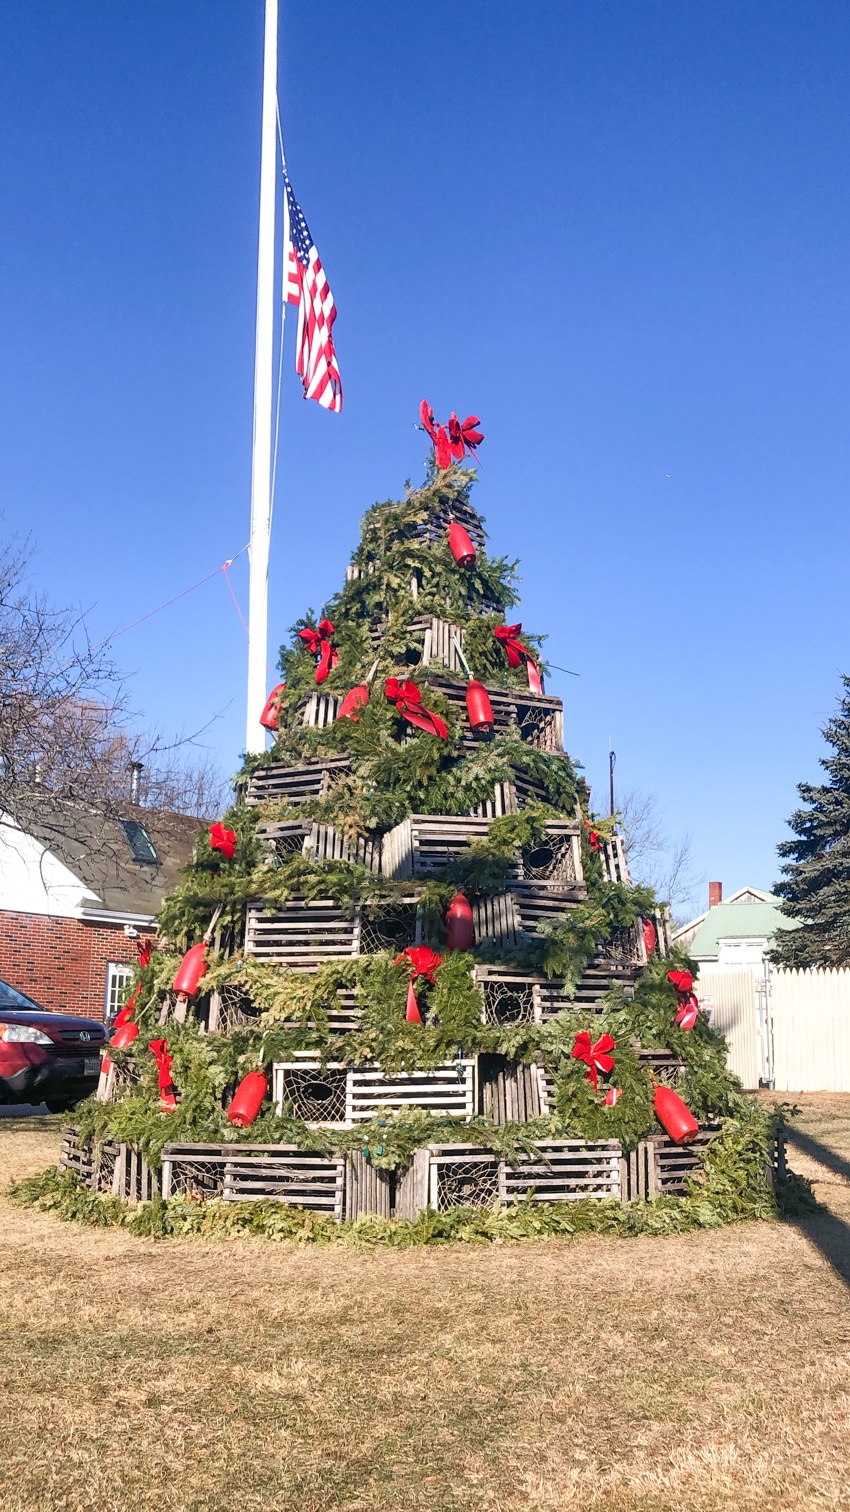 Lobster trap Christmas tree in Kennebunkport, Maine